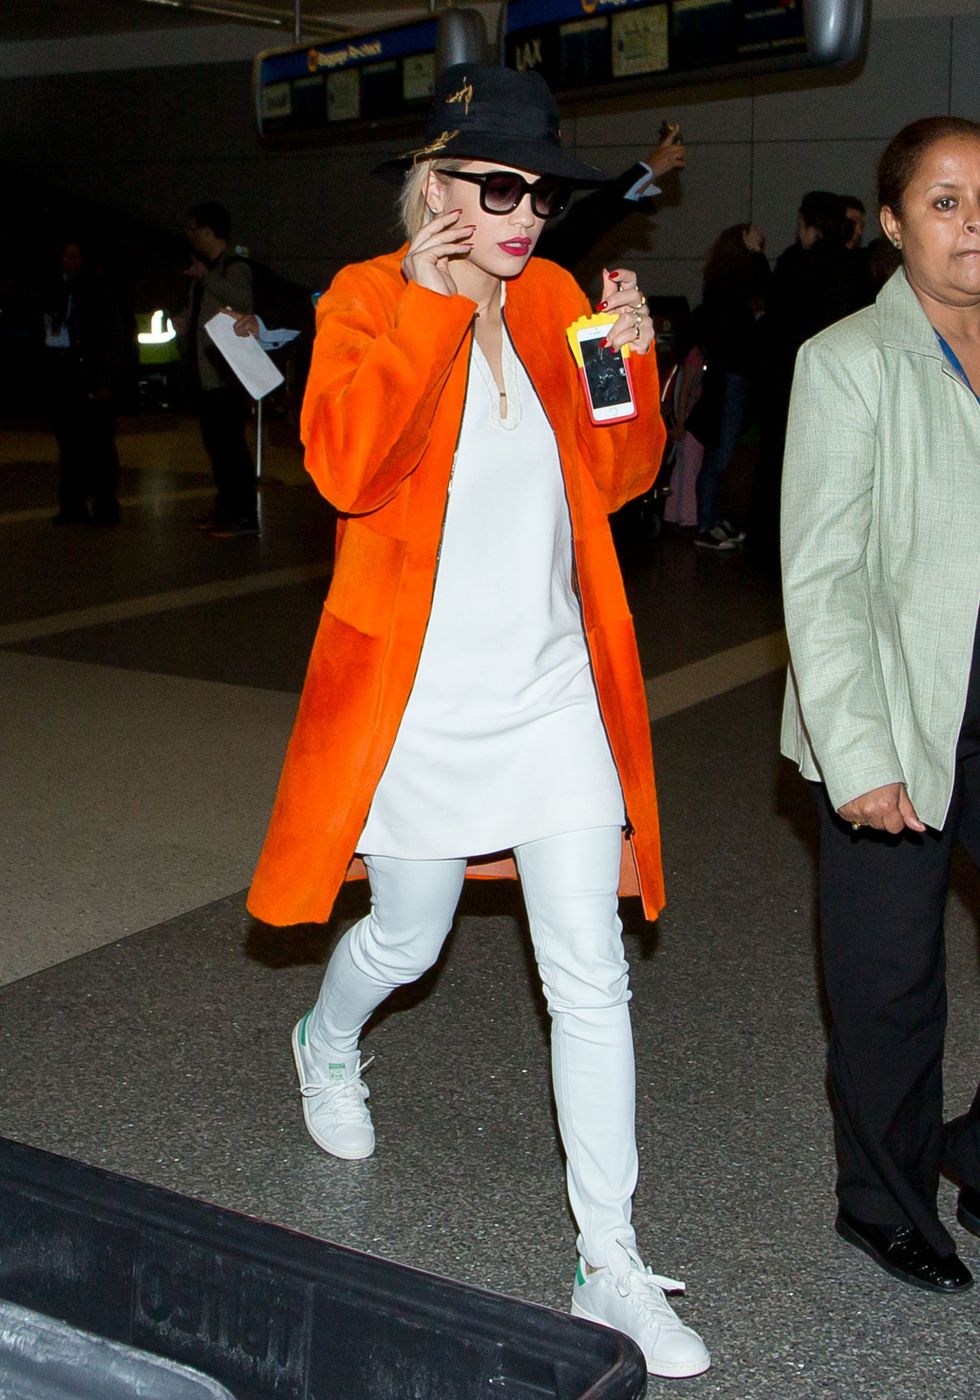 LOS ANGELES, CA - APRIL 10: Rita Ora seen at LAX on April 10, 2014 in Los Angeles, California.  (Photo by GVK/Bauer-Griffin/GC Images)